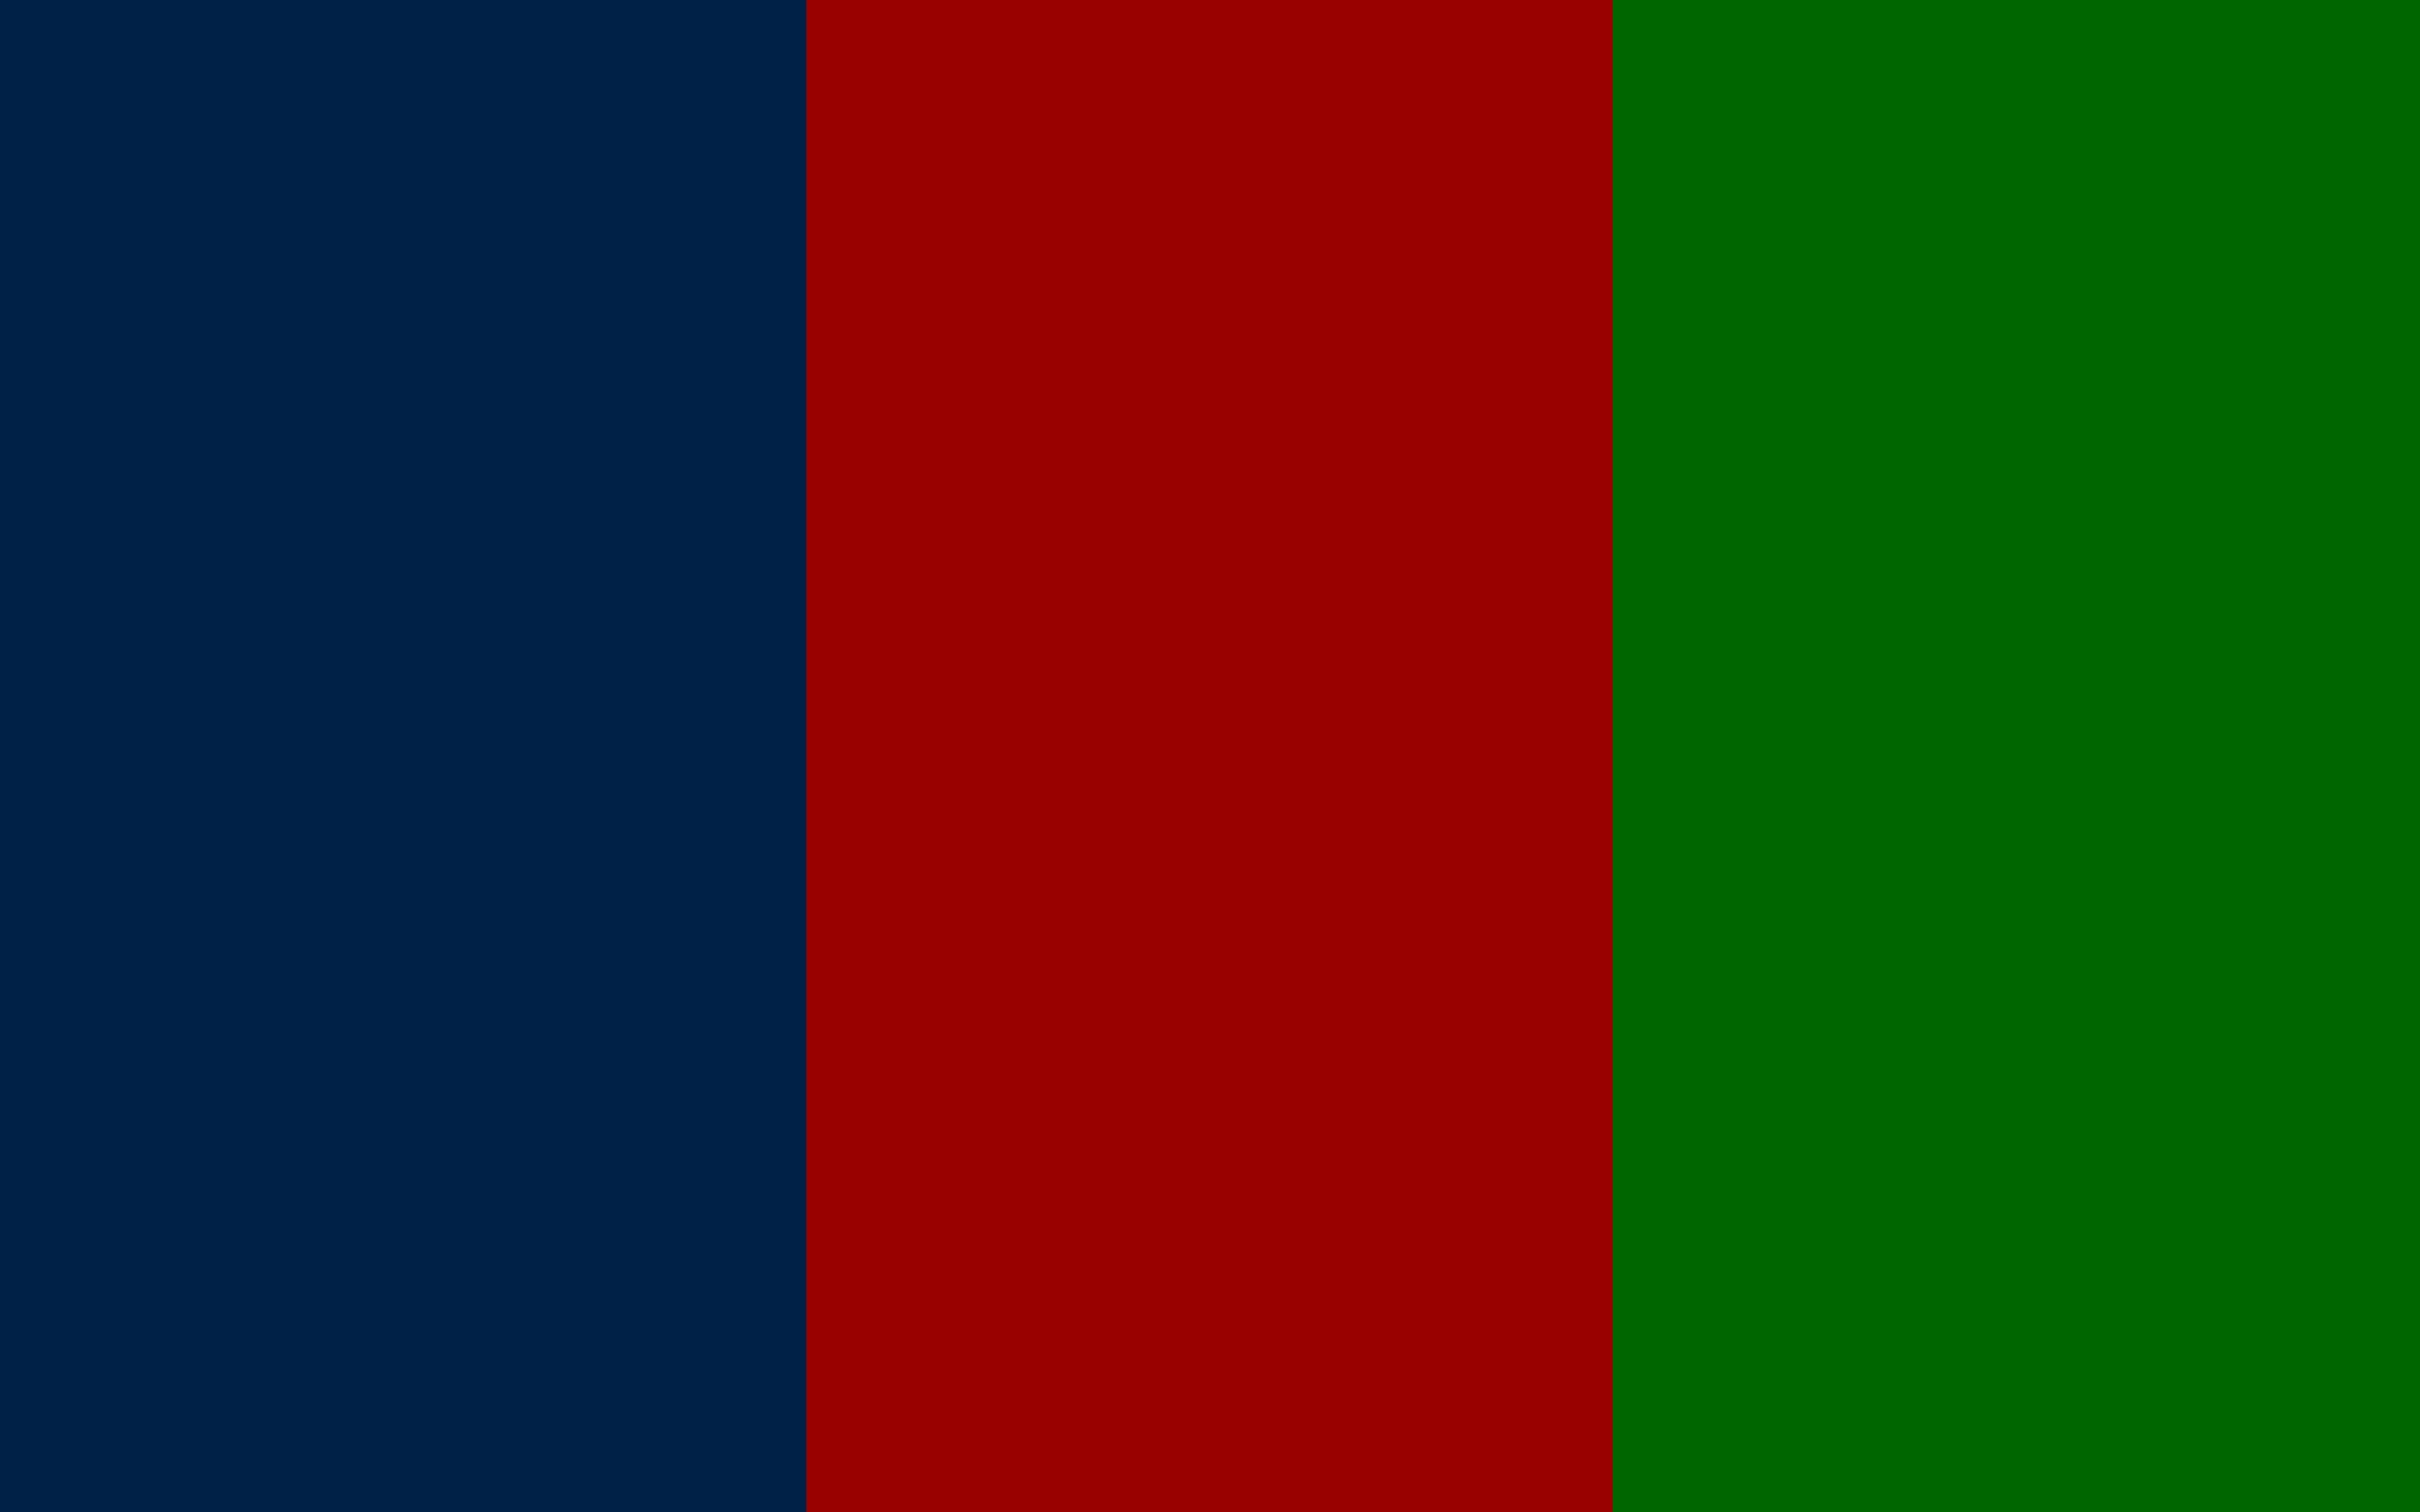 Oxford Blue Ou Crimson Red And Pakistan Green Three Color